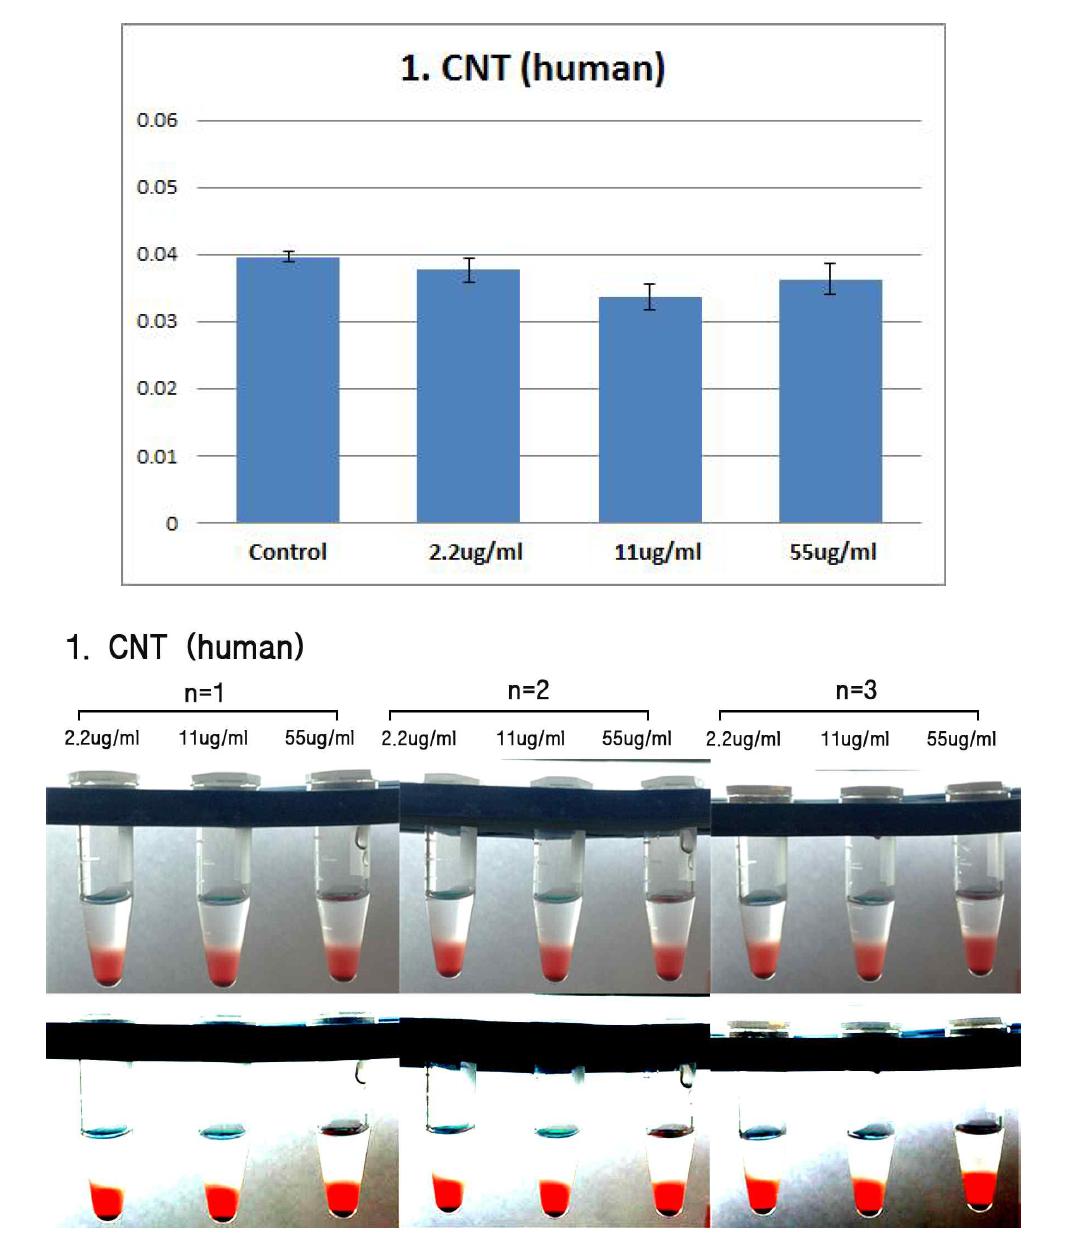 Effects of CNT on human erythrocyte. Erythrocyte were treated with CNT (55 ug/ml, 11 ug/ml, 2.2 ug/ml) for 2hrs. The results are presented as mean ± SE